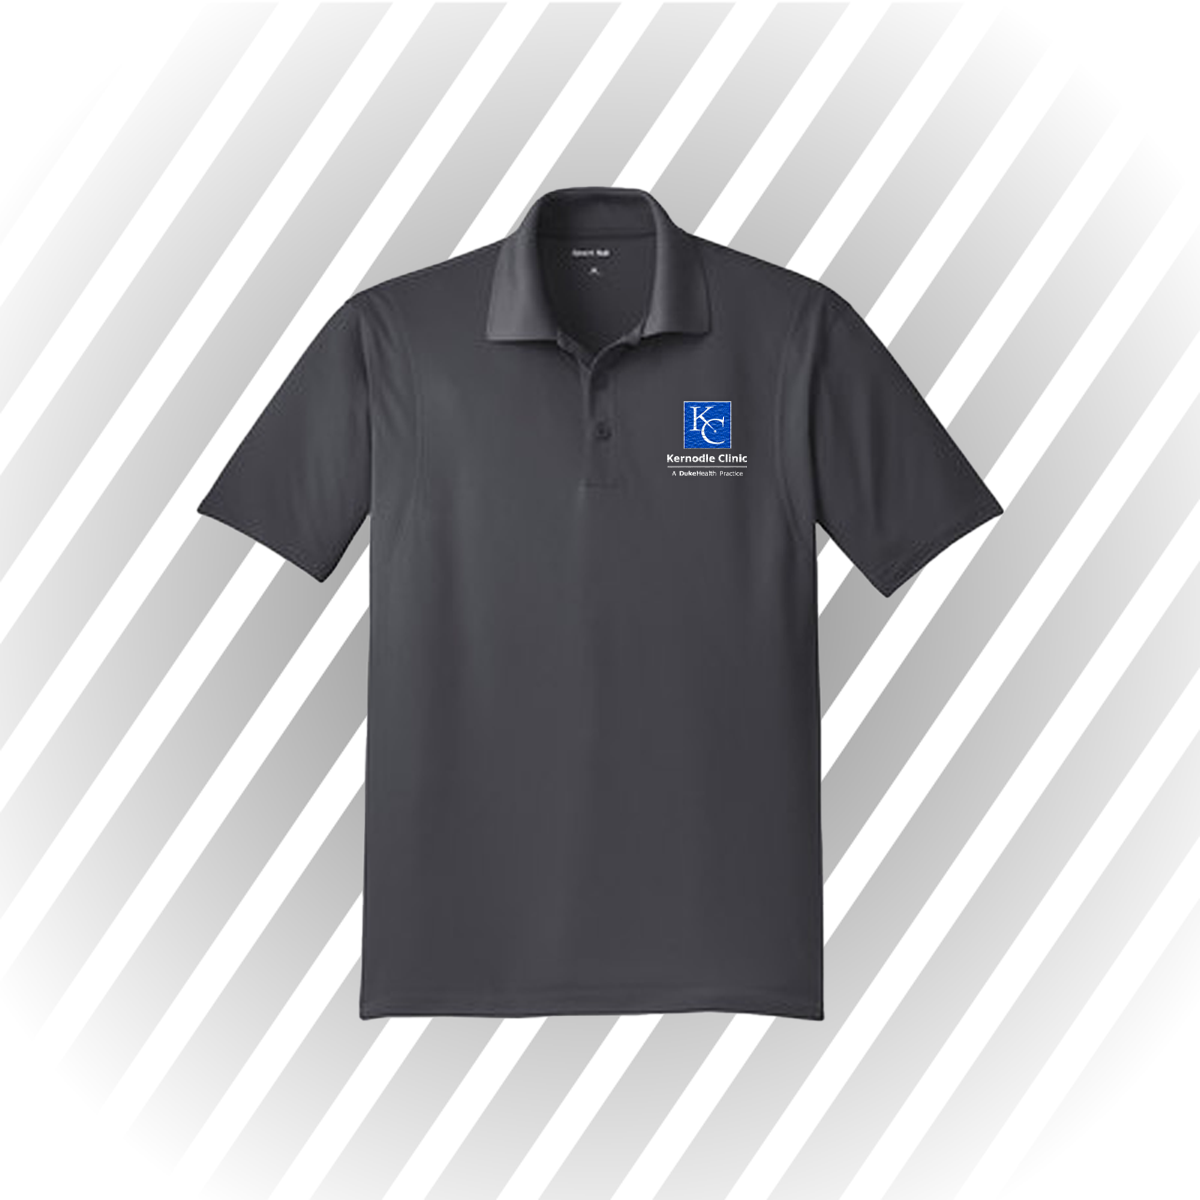 Kernodle Clinic Polo